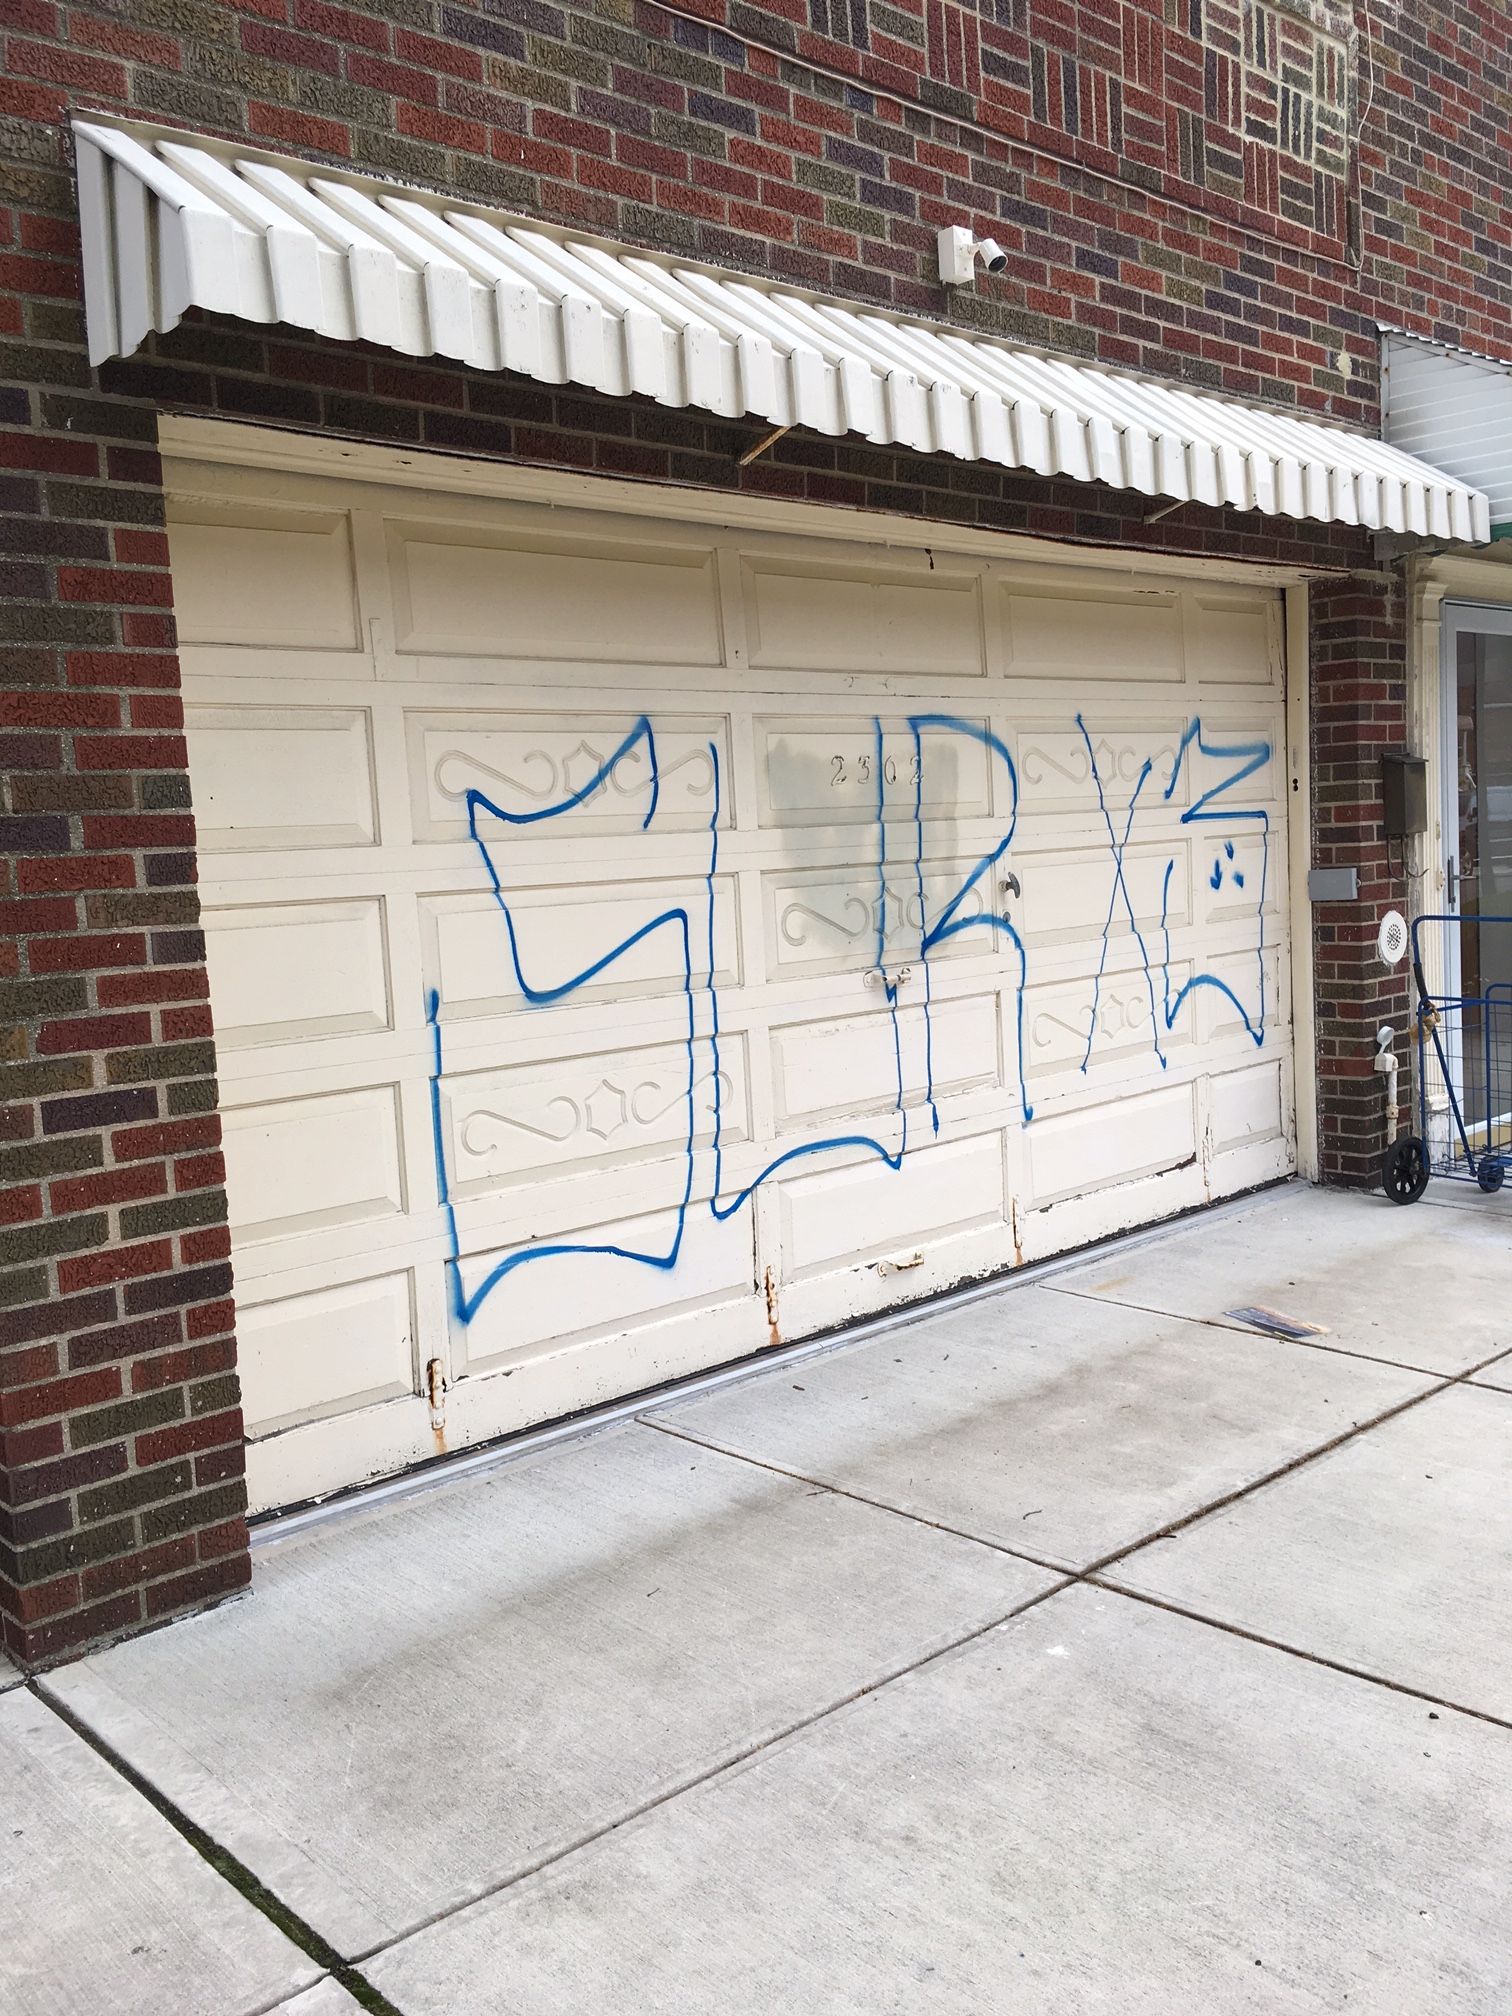 Entire Gravesend Block Defaced With Gang Graffiti, Cops Shrug